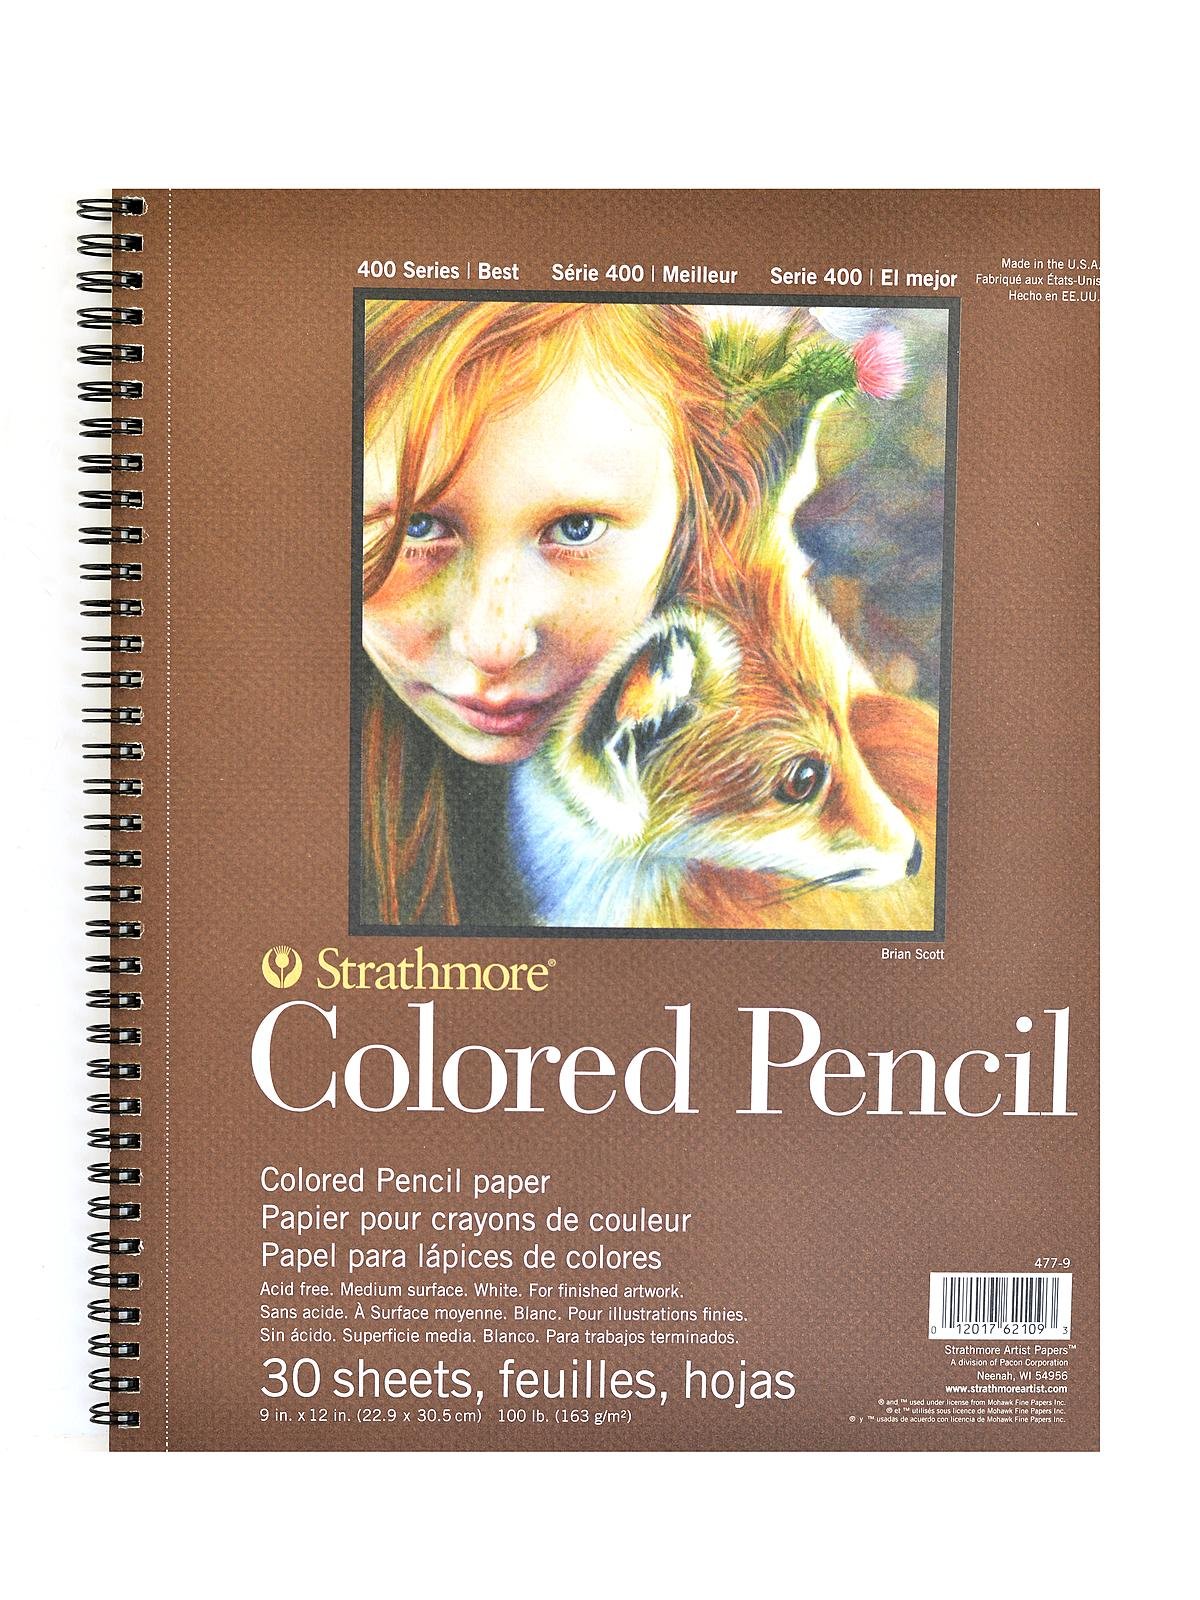 Strathmore 400 Series Colored Pencil Pad - 12 x 9, 30 Sheets, 100 lb